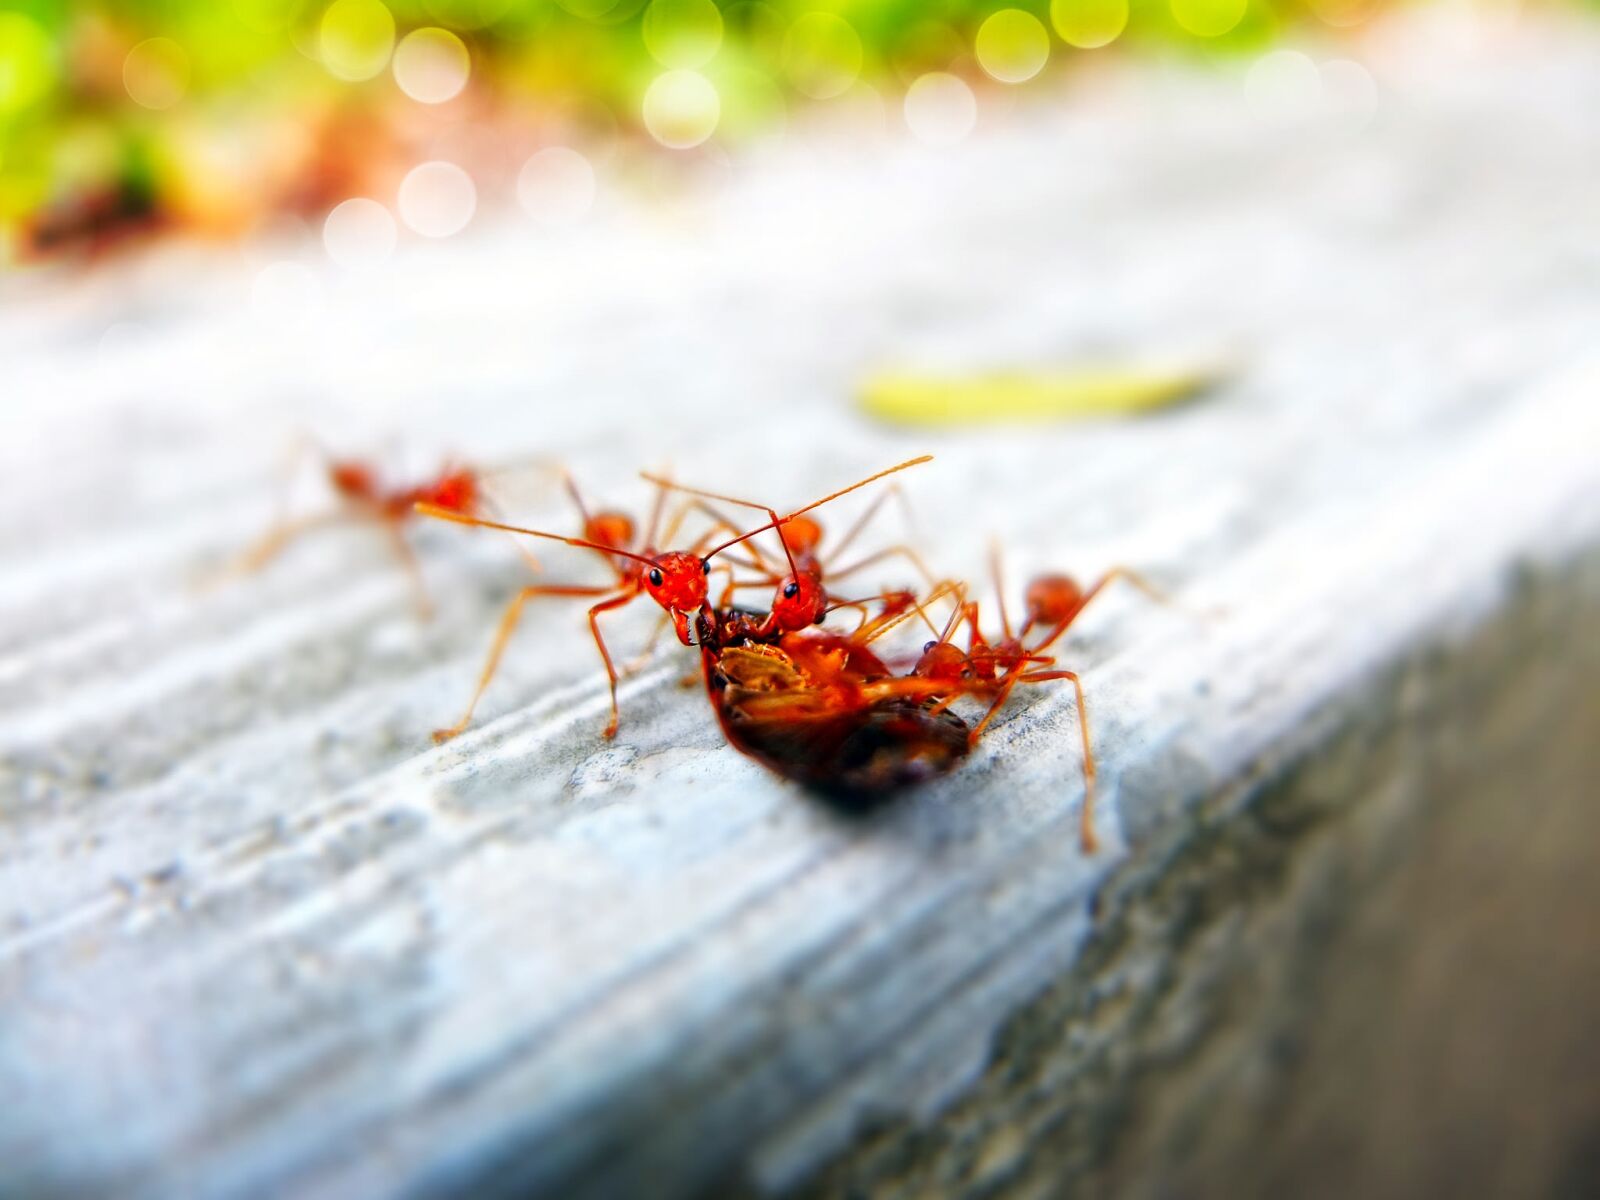 Fujifilm X10 sample photo. Ants, close-up, insects photography